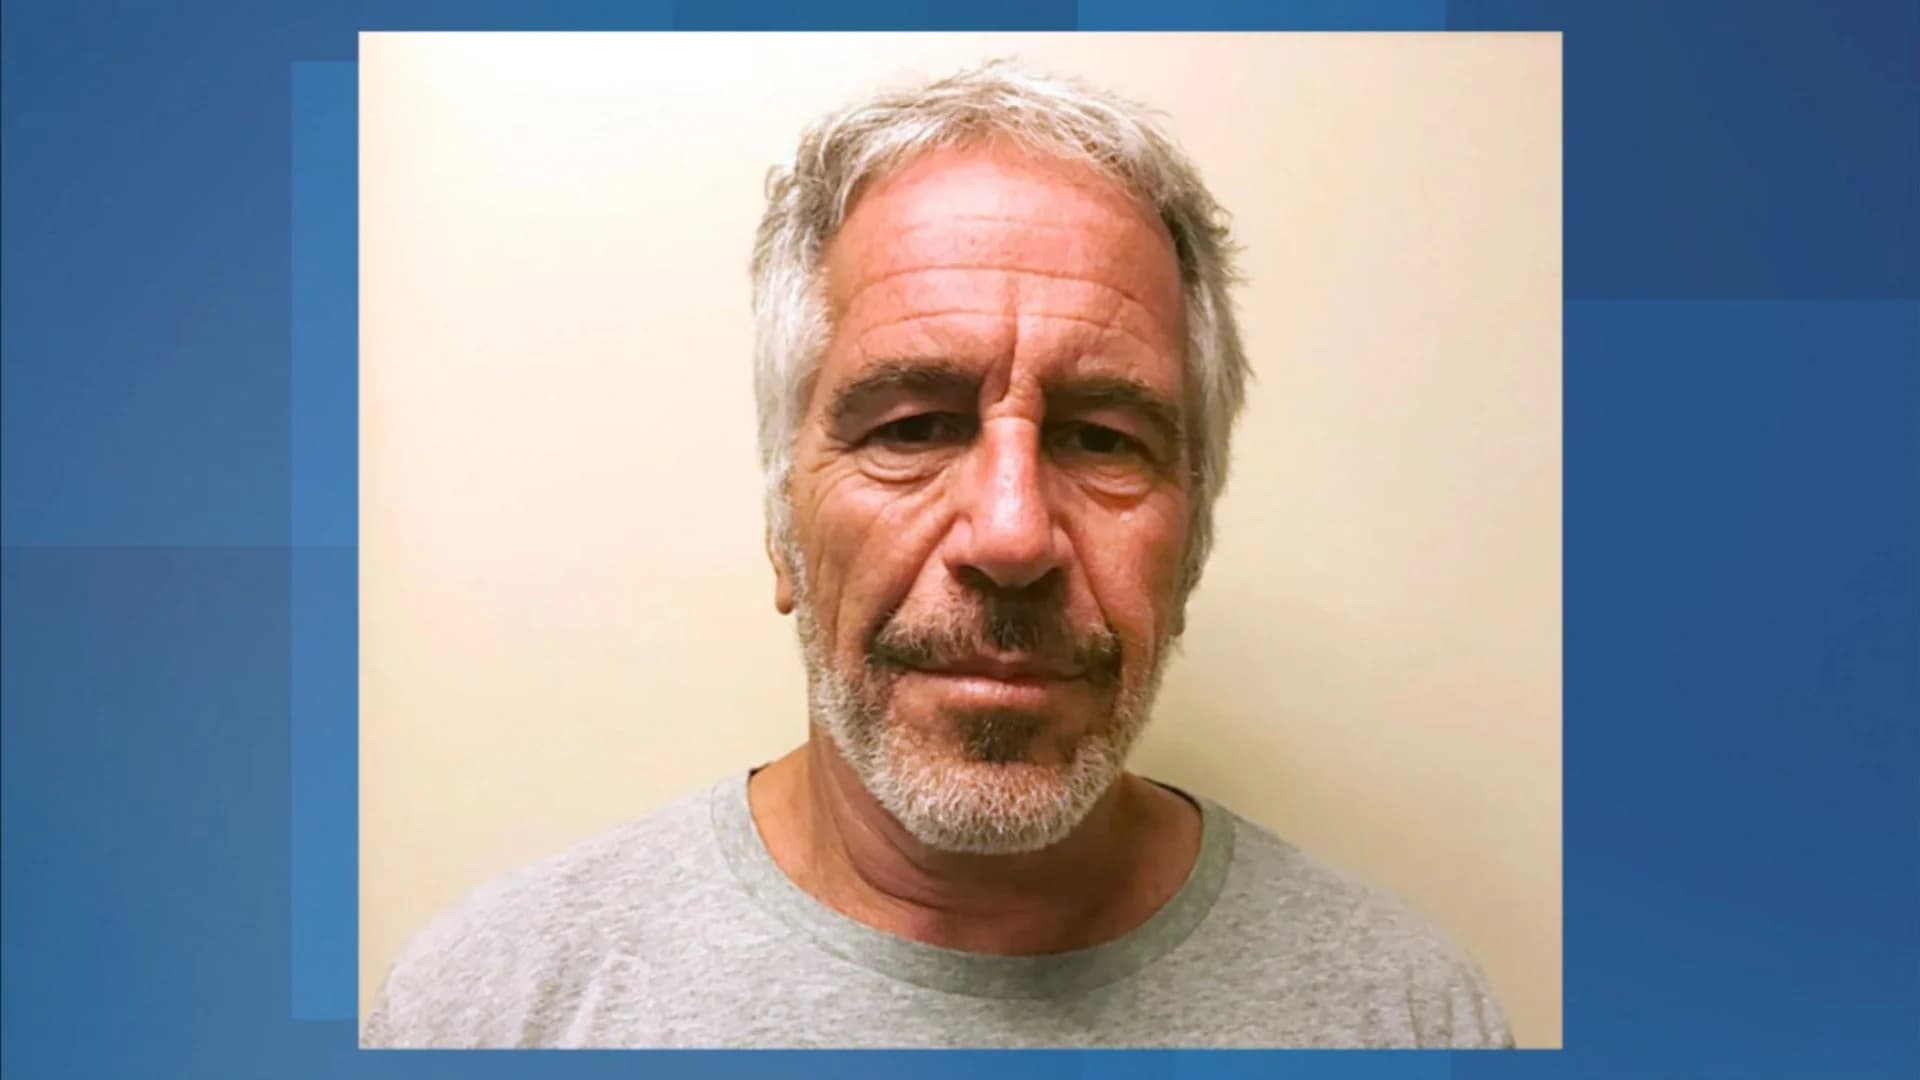 Criminal charges expected this week against Epstein guards